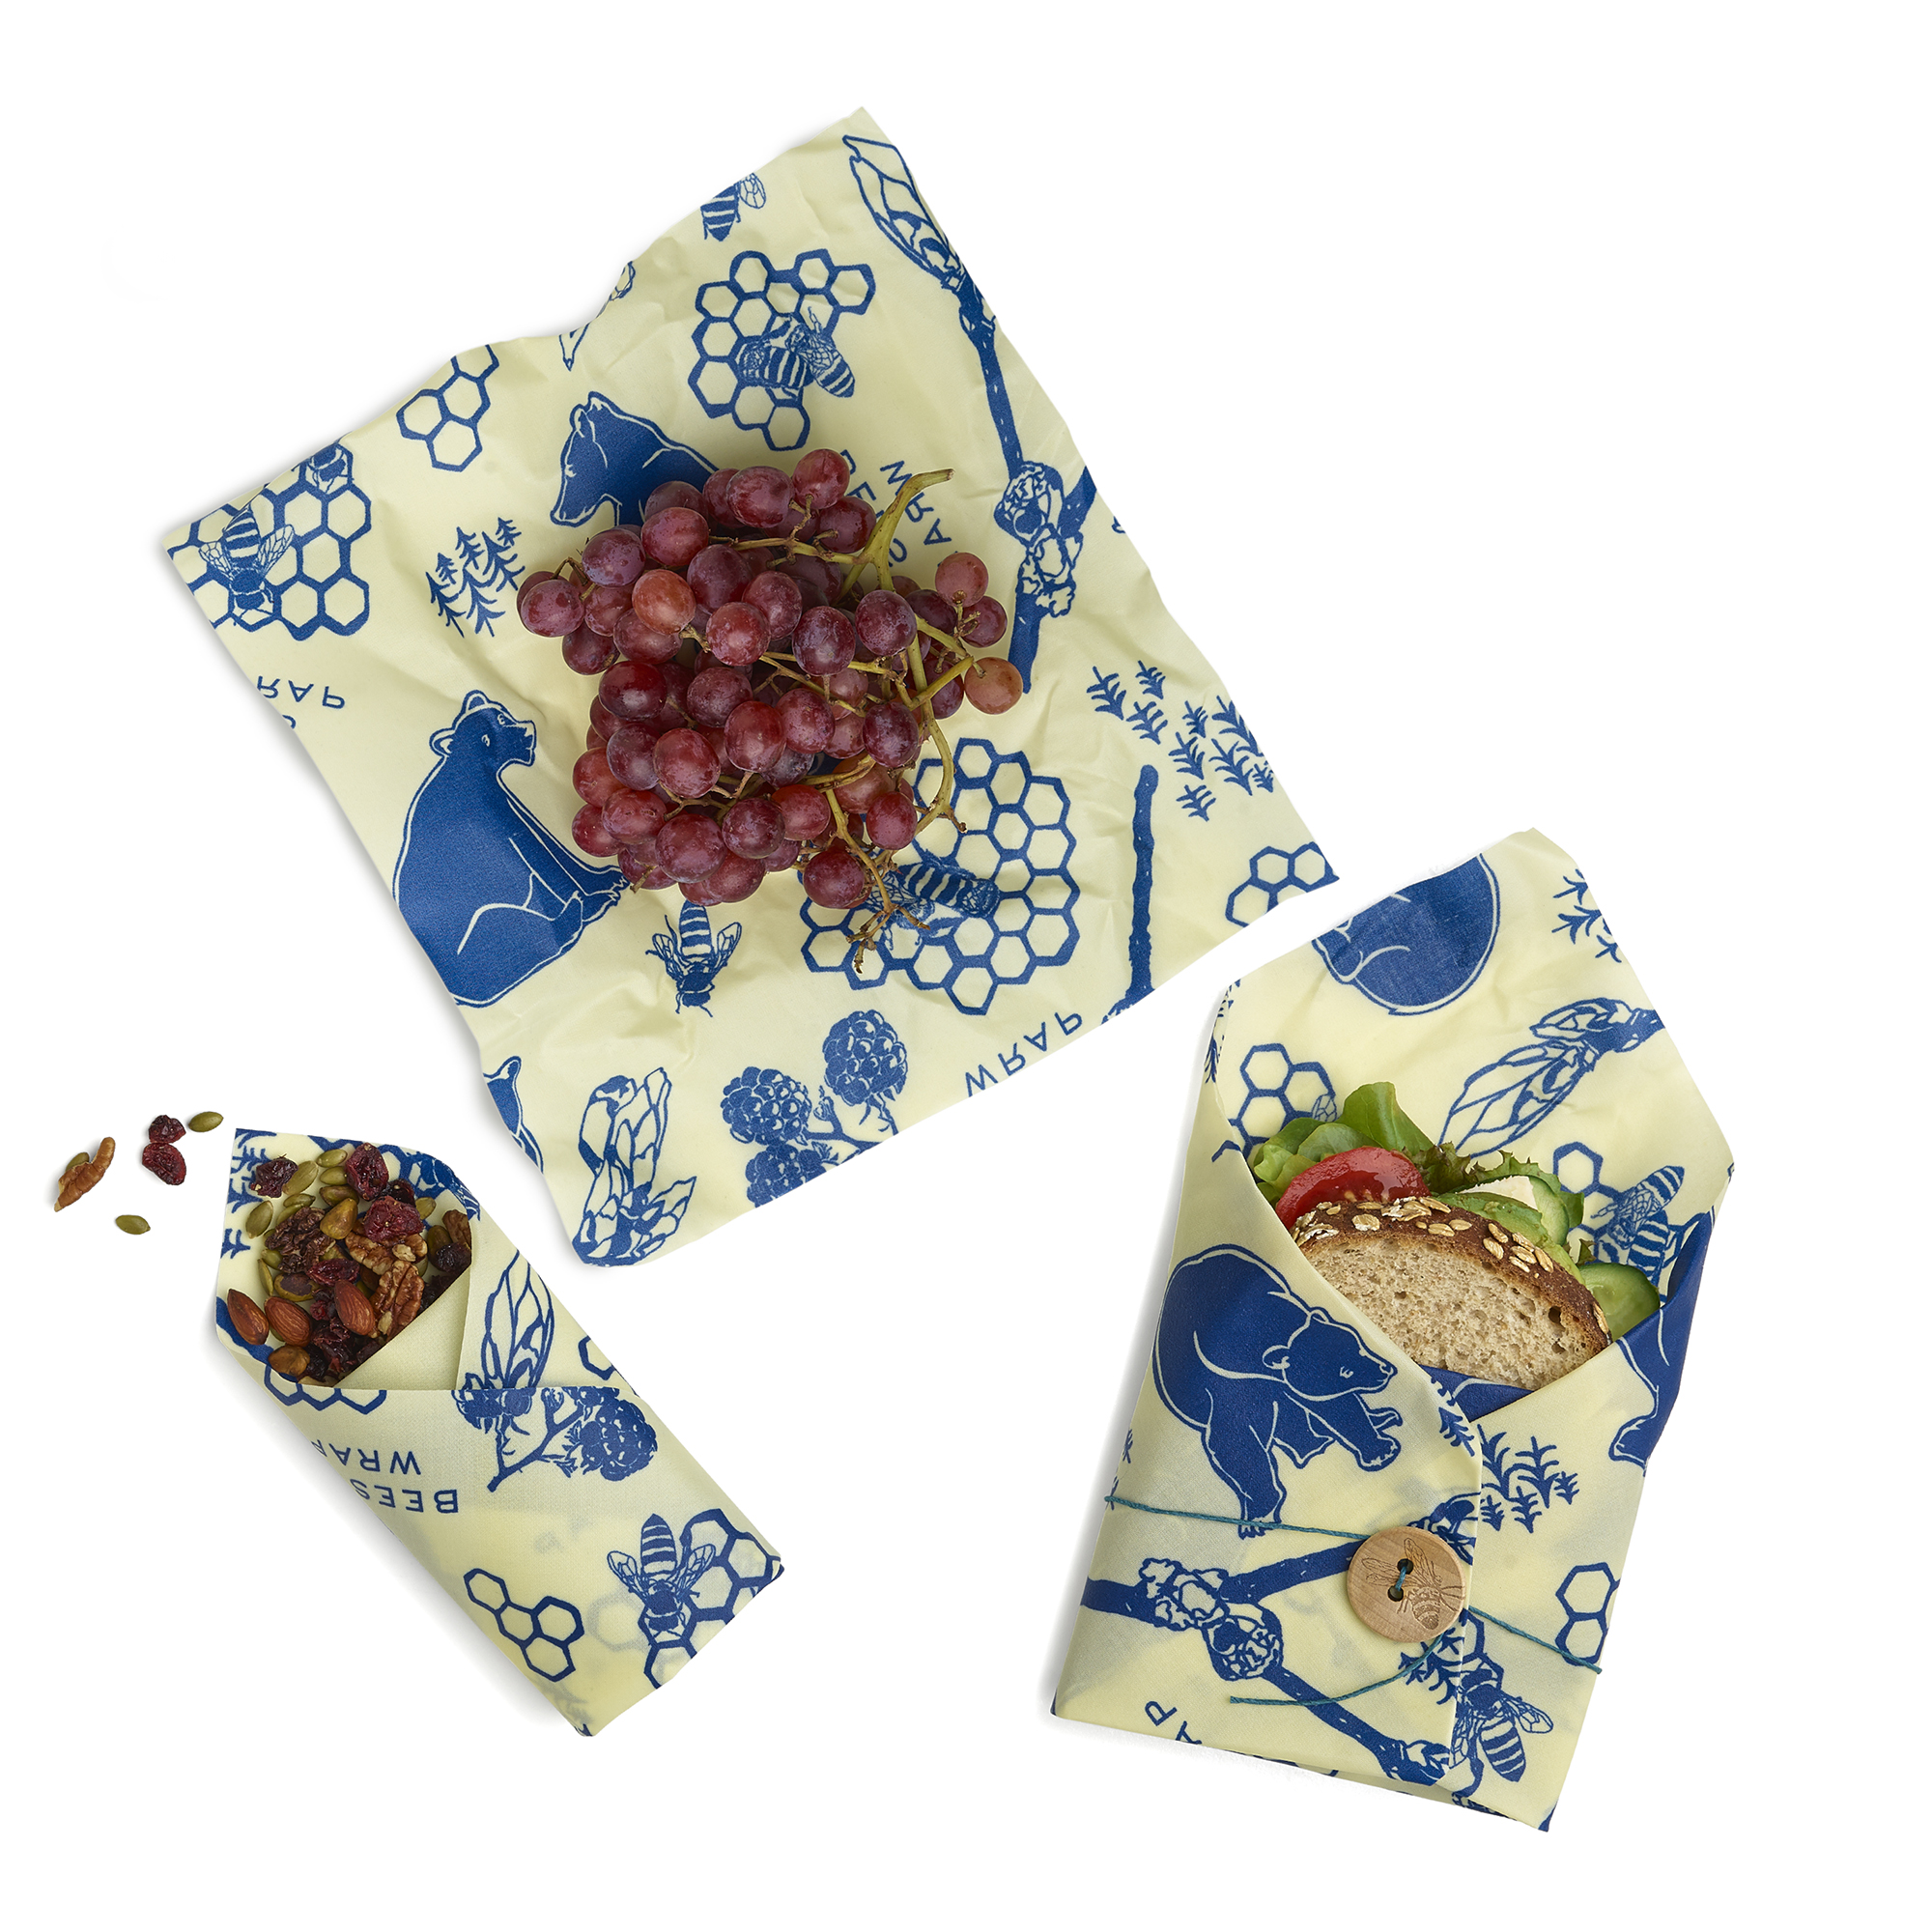 Bee's Wrap - Lunch Pack - with Certified Organic Cotton - Plastic and Silicone Free - Reusable Eco-Friendly Beeswax Food Wrap - Sandwich Wrap and 2 Medium Wraps - image 1 of 3